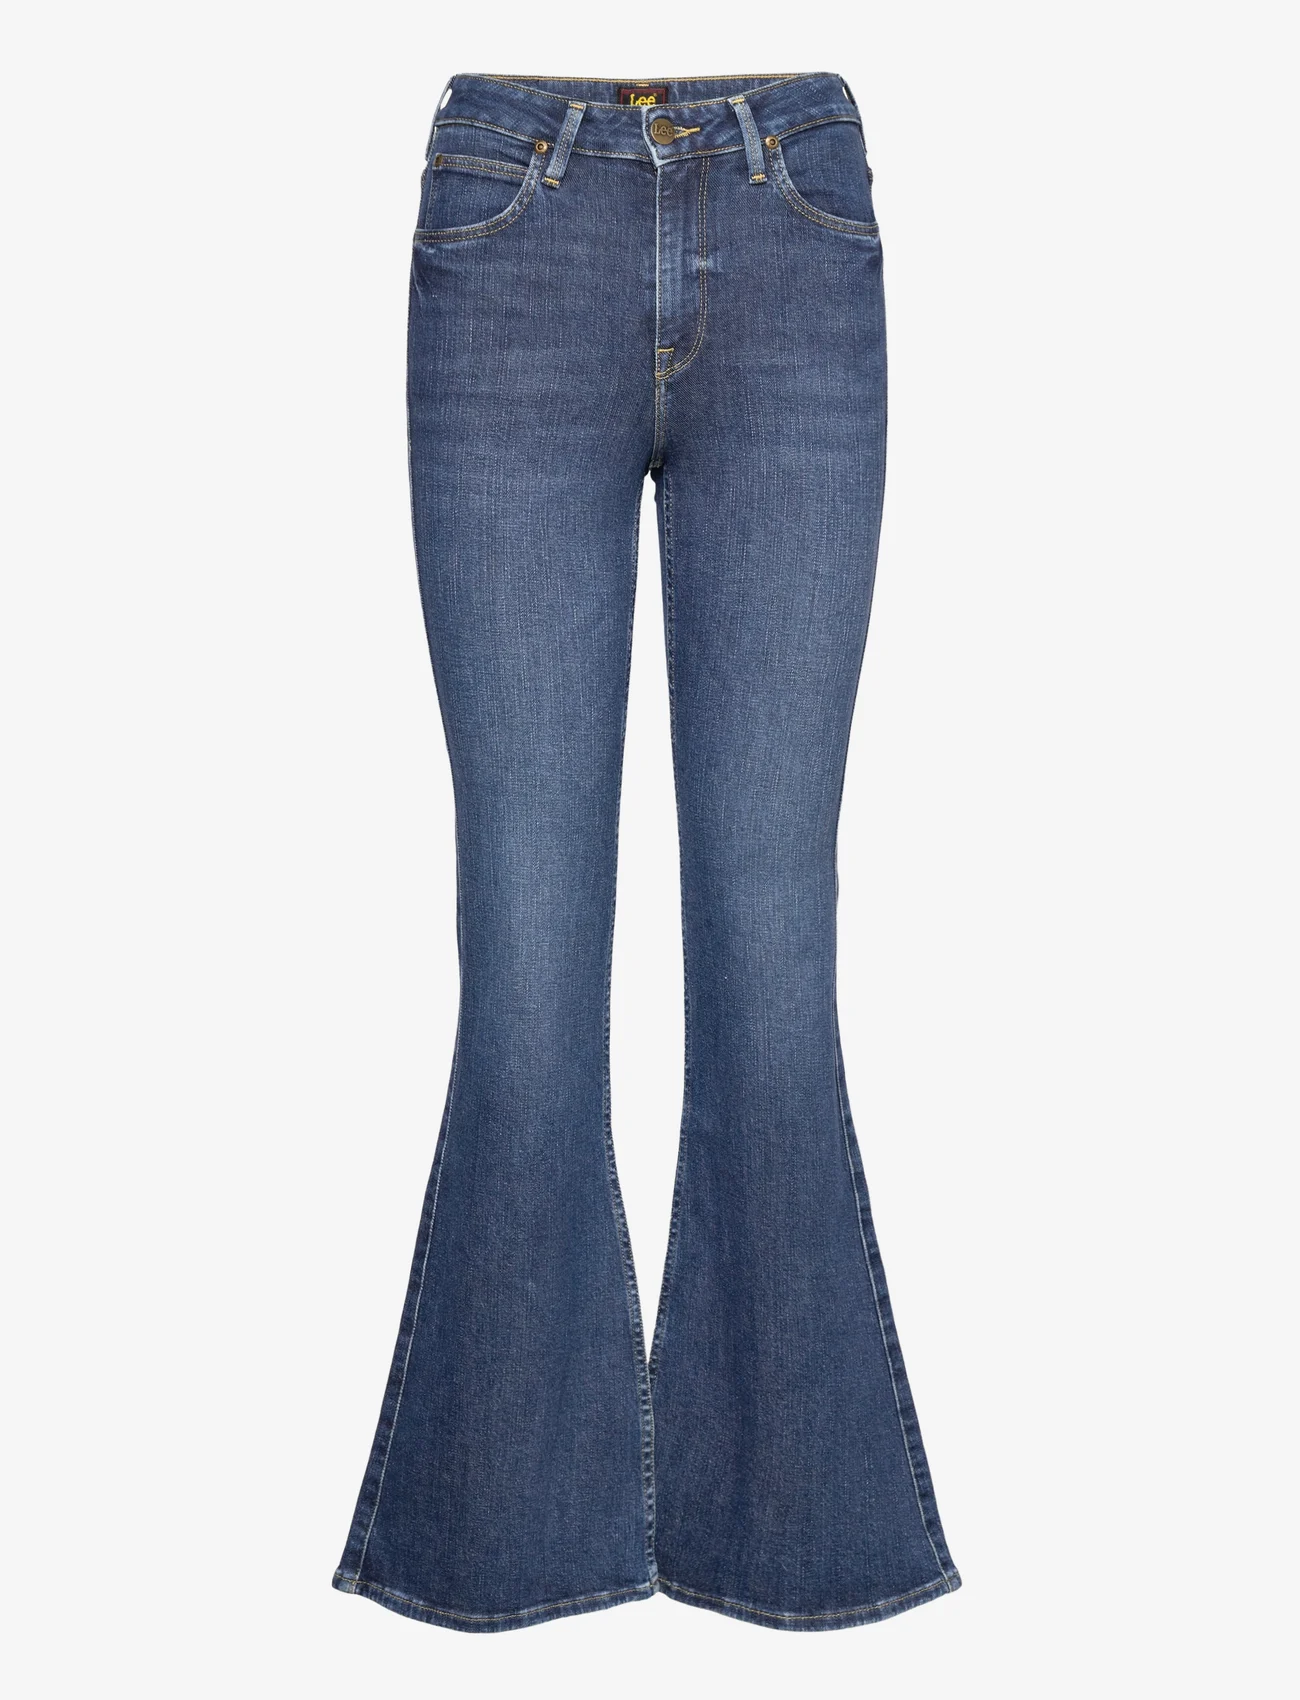 Lee Jeans - BREESE - flared jeans - blue typhoon - 0